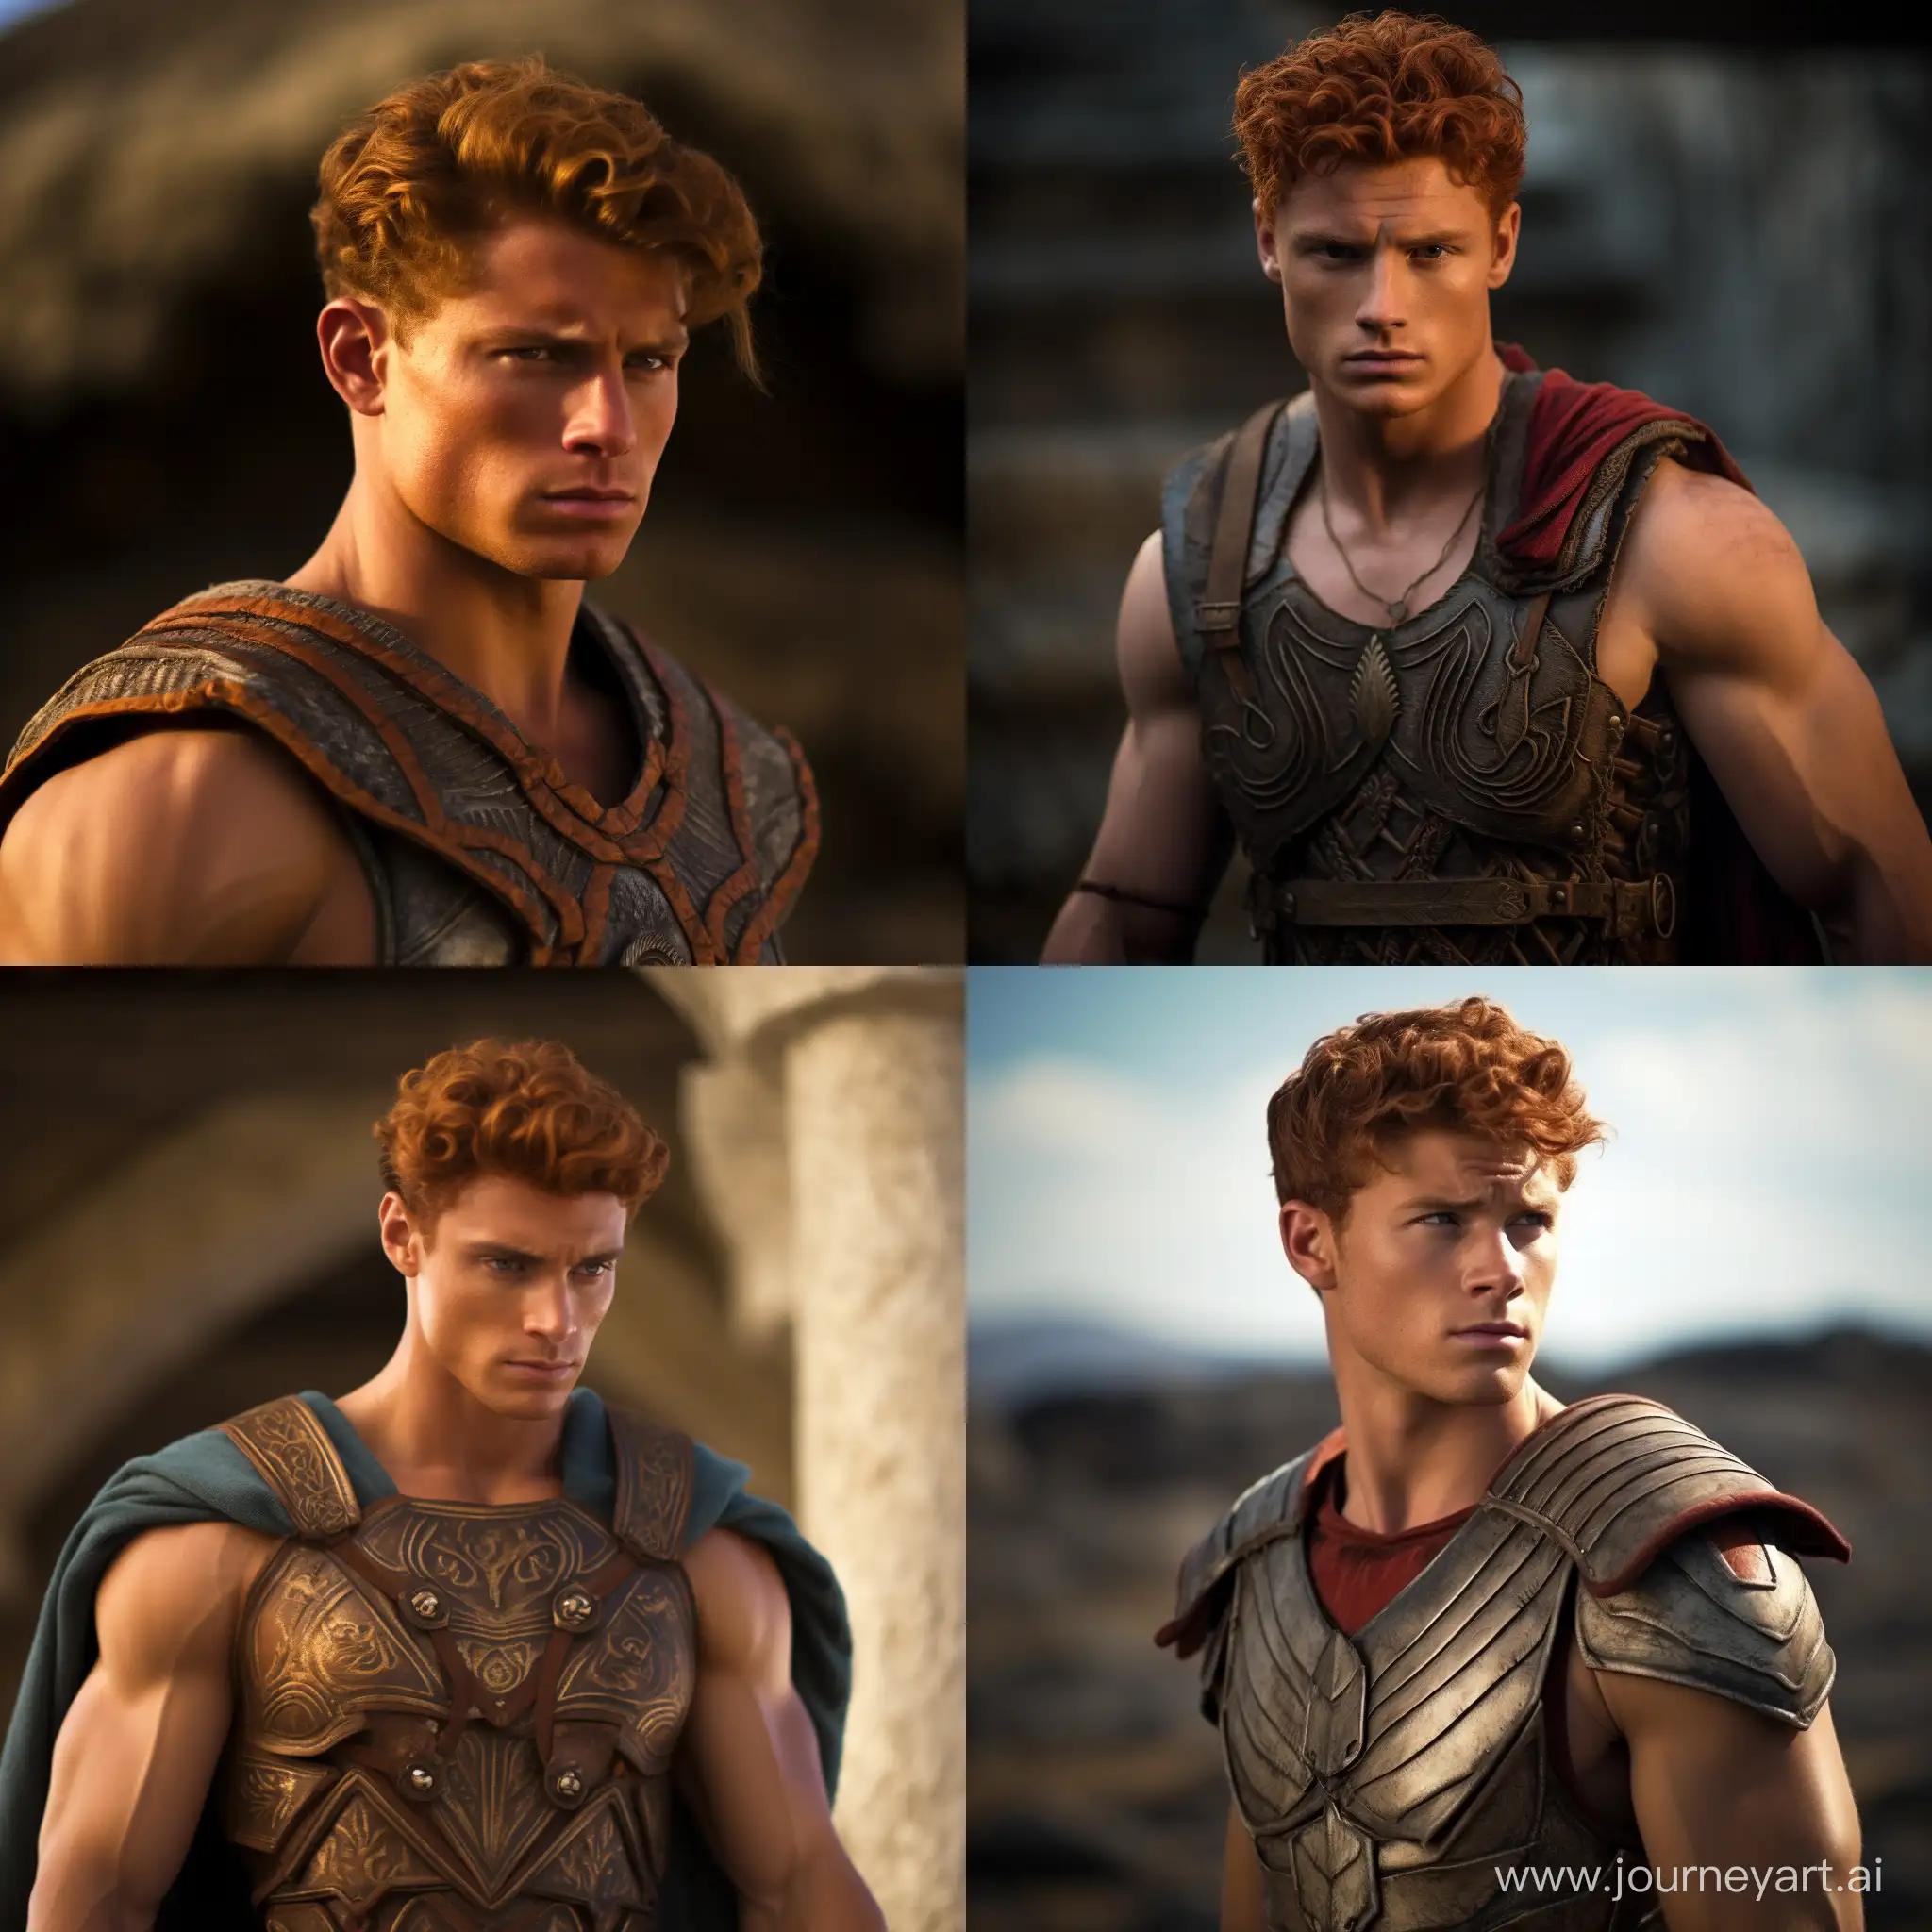 Young-Gladiator-with-Striking-Muscular-Build-and-Unique-Hairstyle